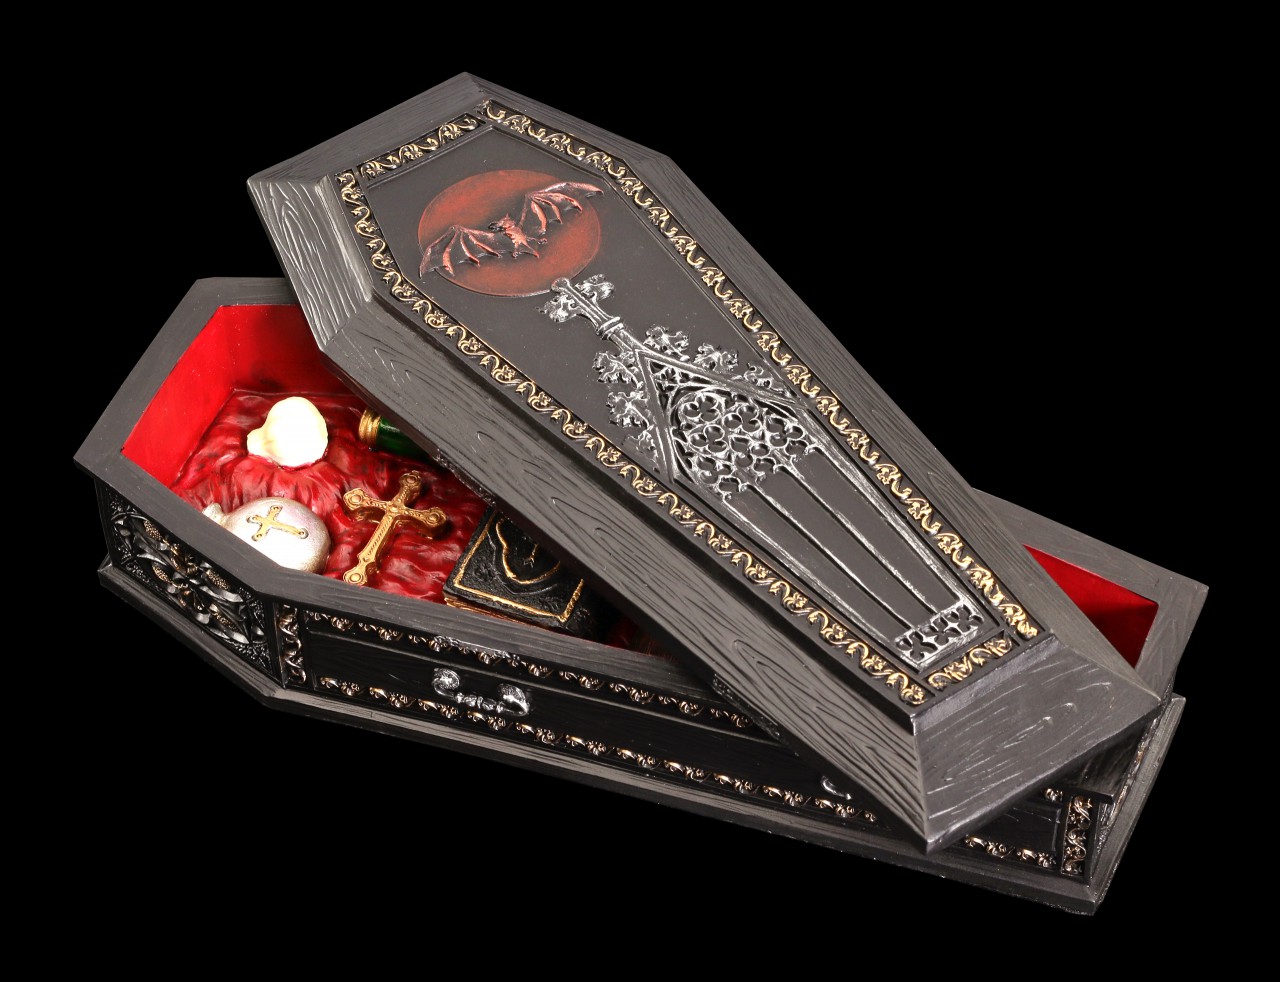 Coffin Box with Vampire hunting Gear